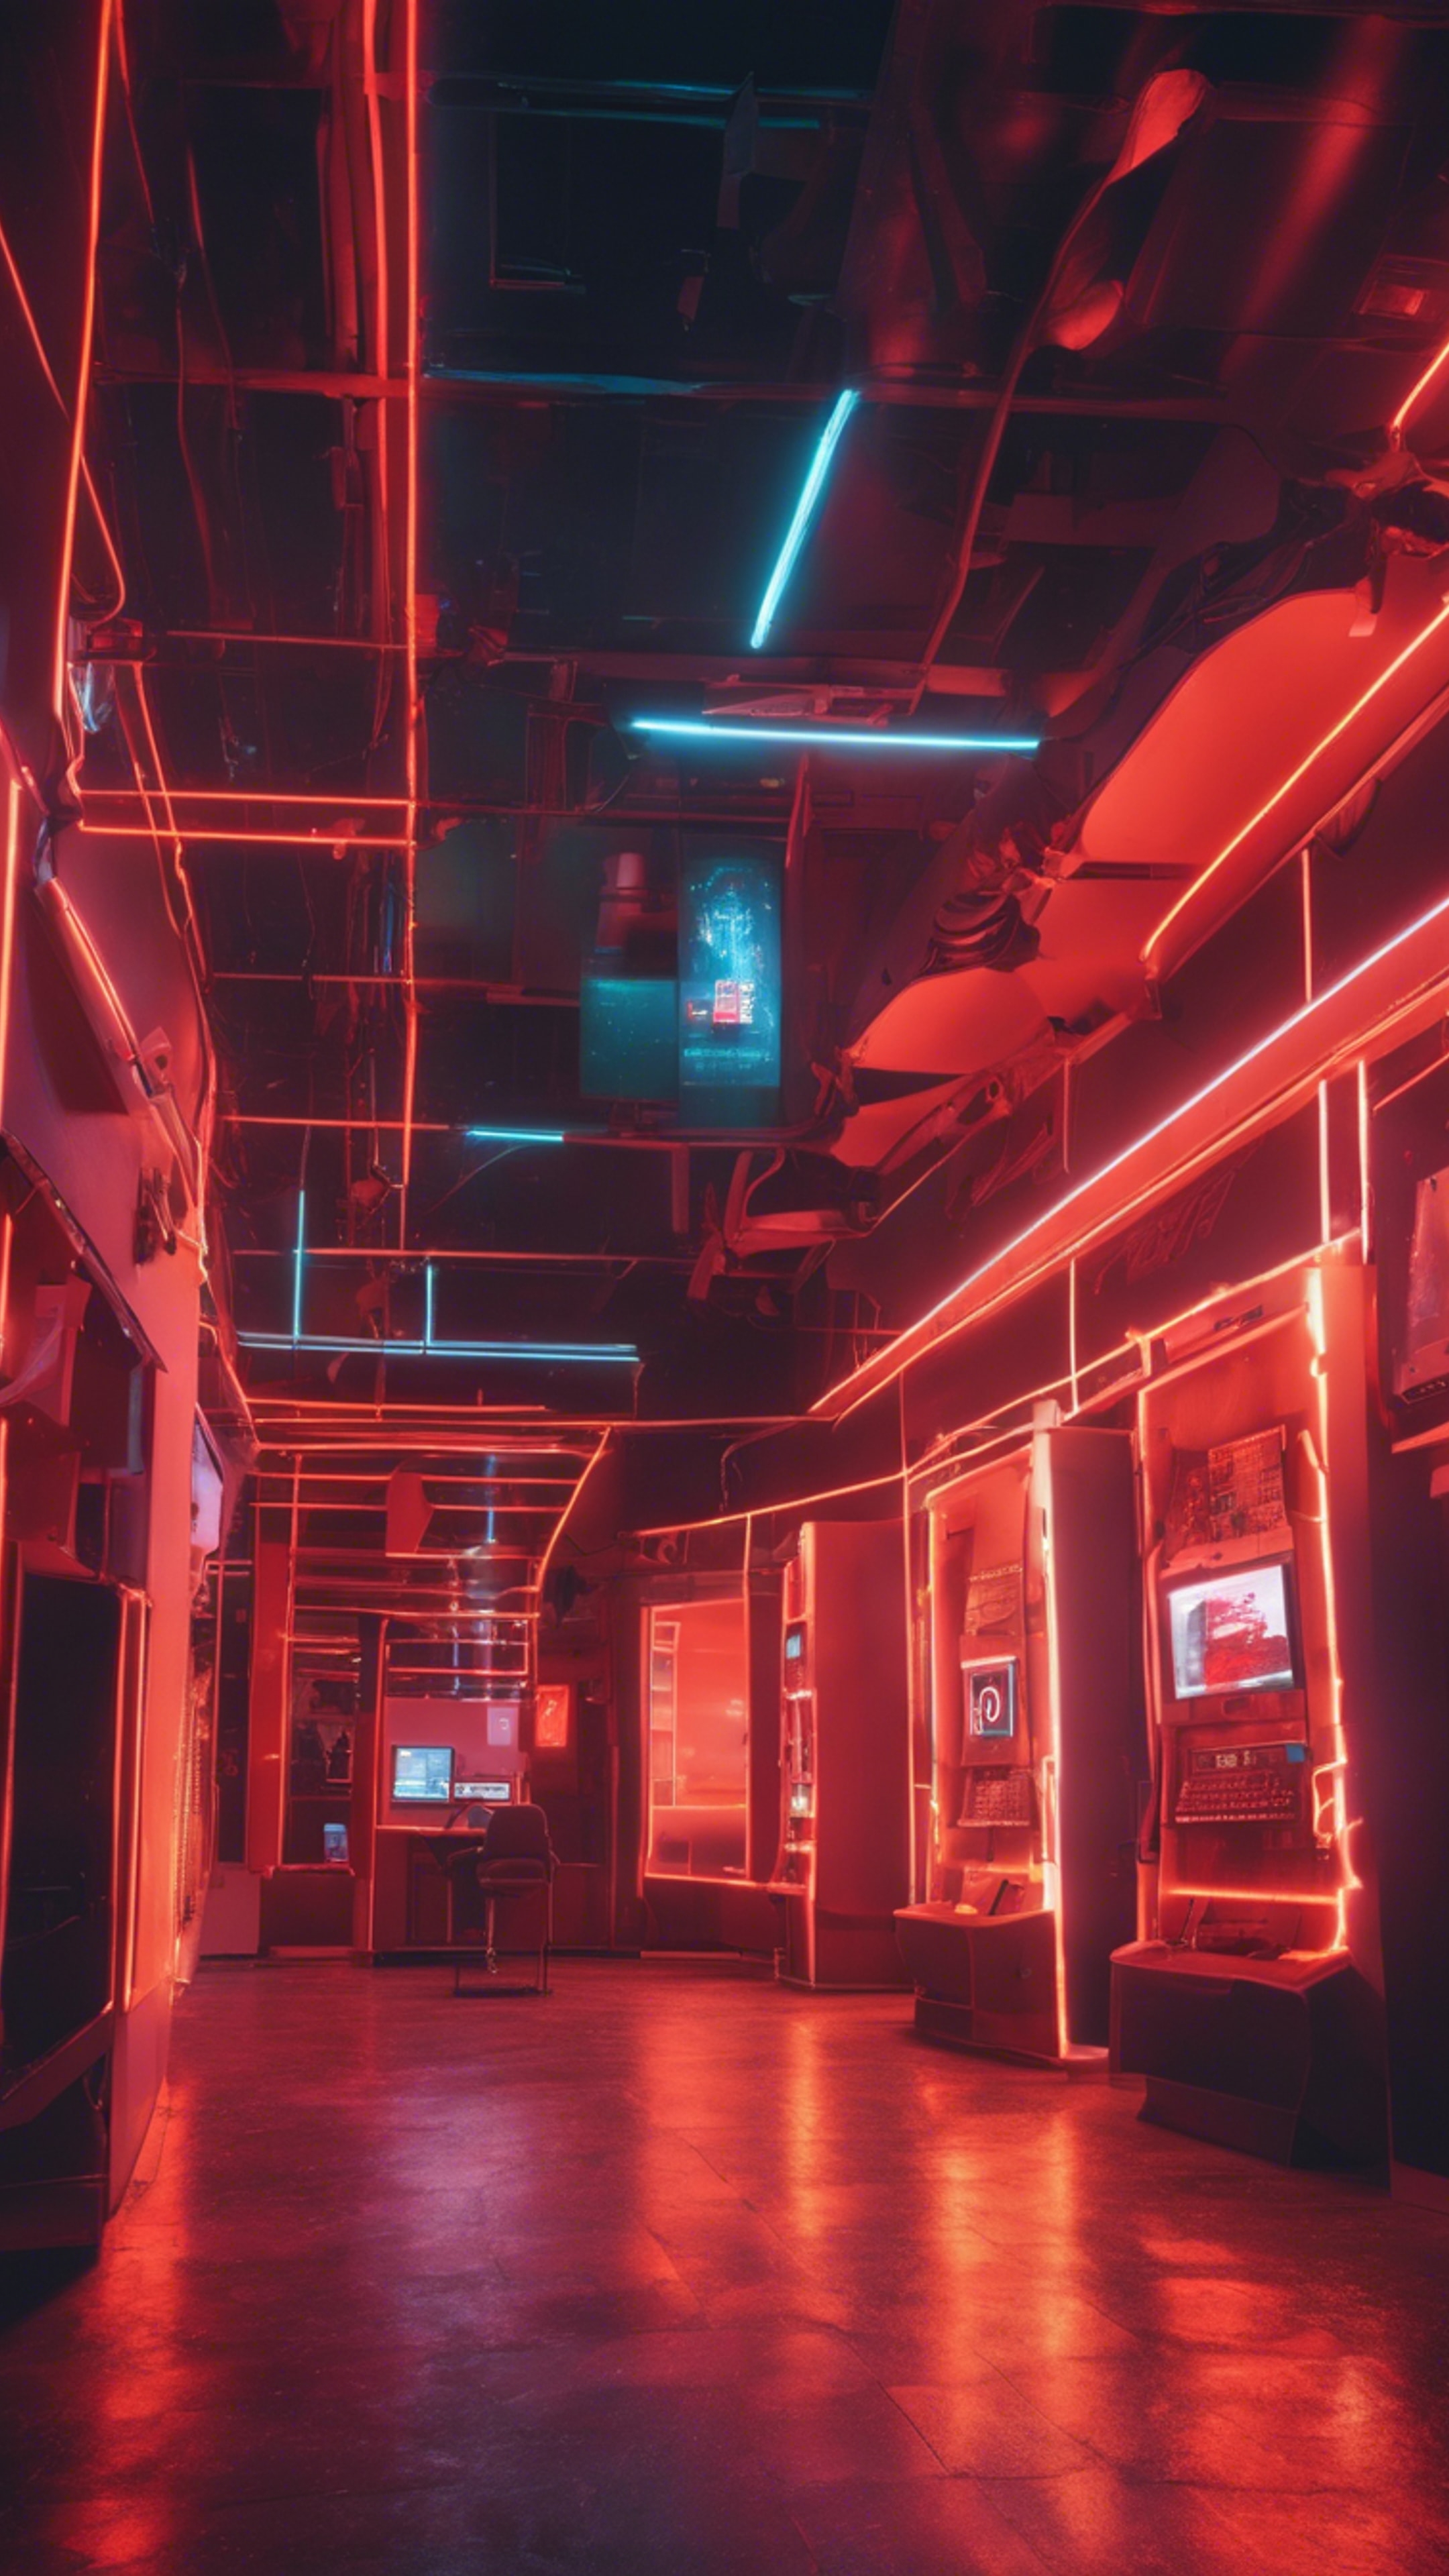 An architecturally unique cyber cafe glowing with neon red and orange lights at night. Papel de parede[37c23e18da0f466d9ff8]